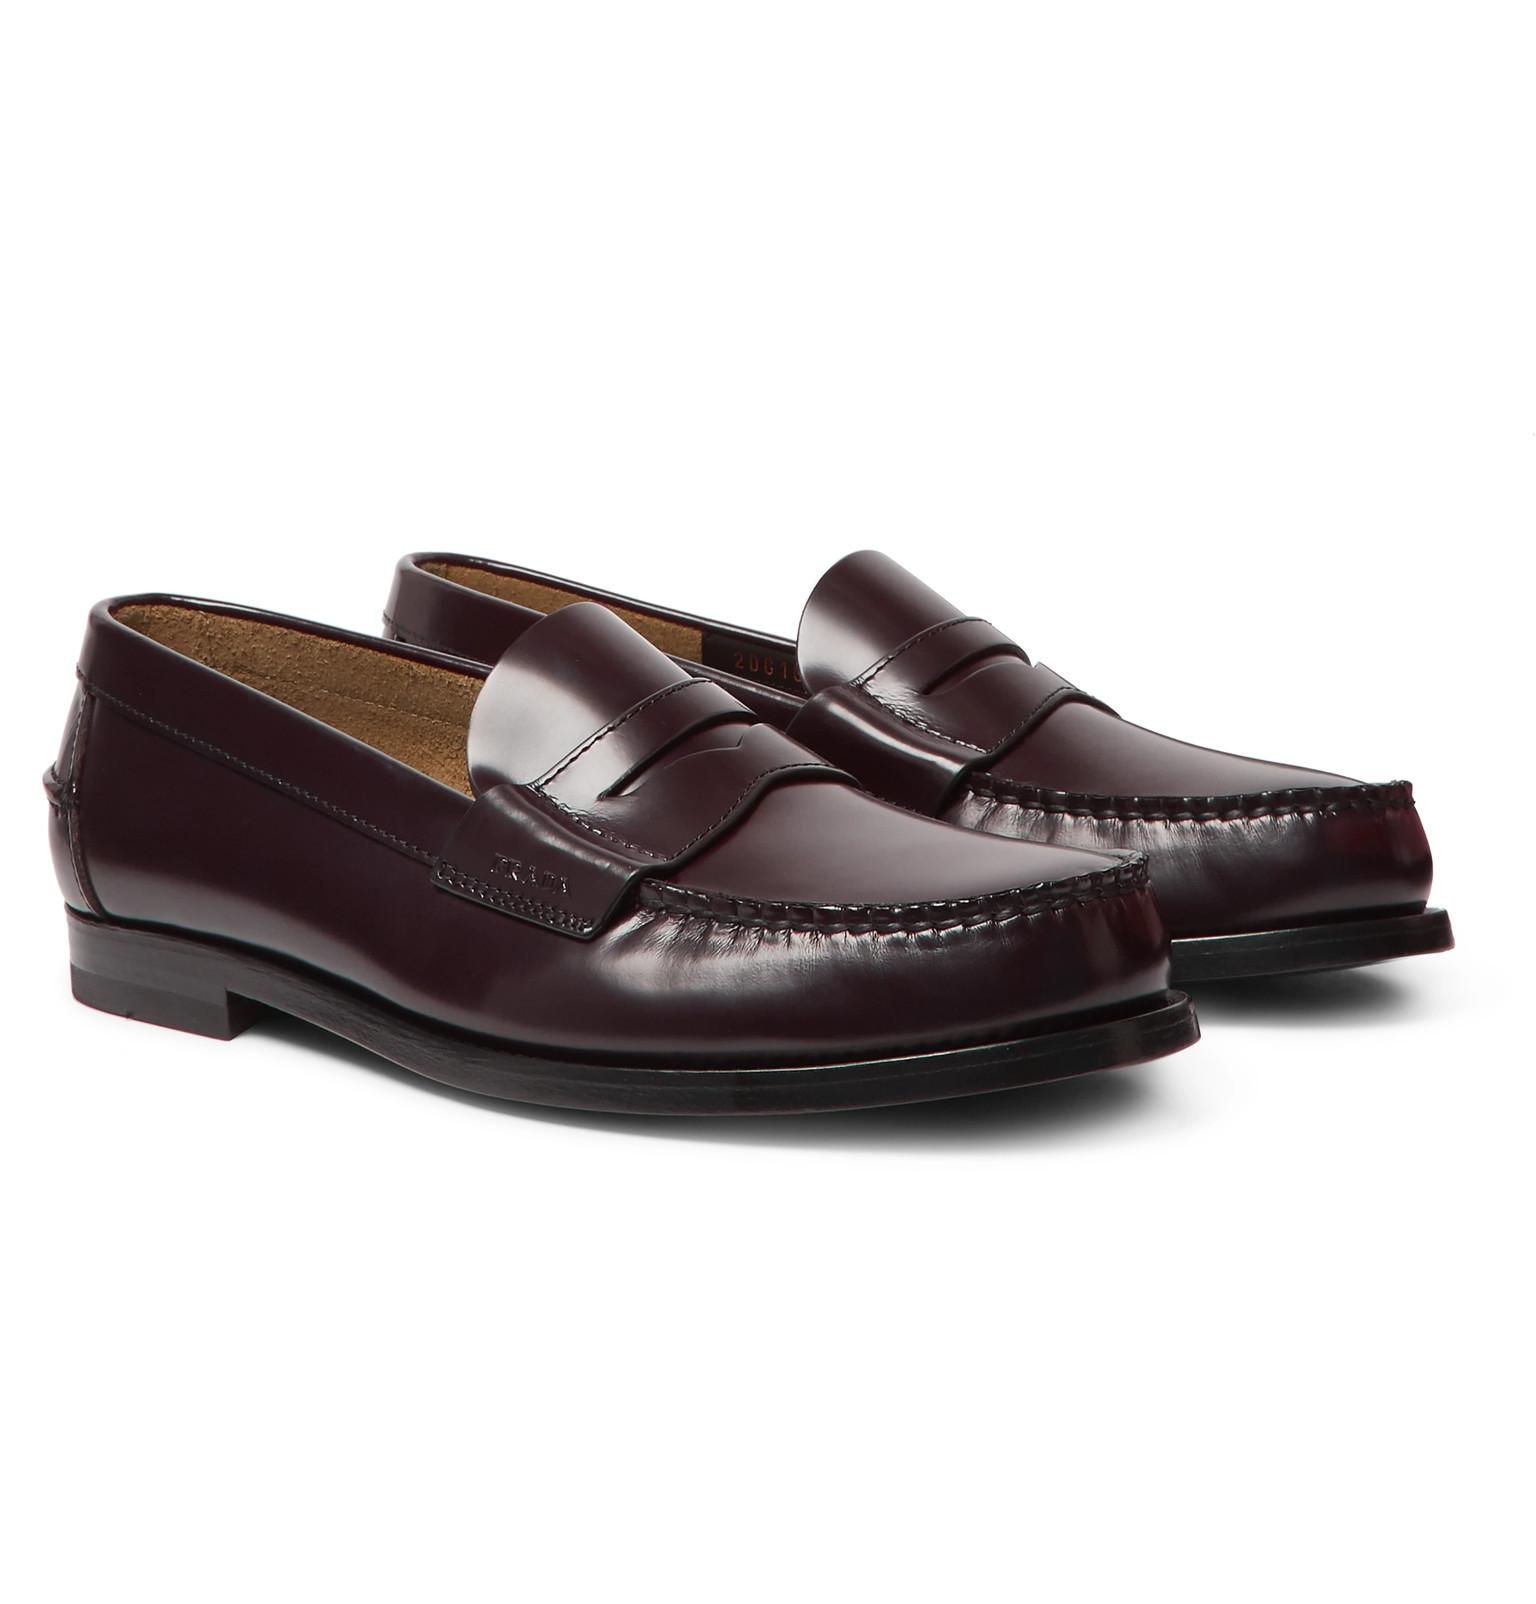 Prada Spazzolato Leather Penny Loafers in Burgundy (Brown) for Men - Lyst